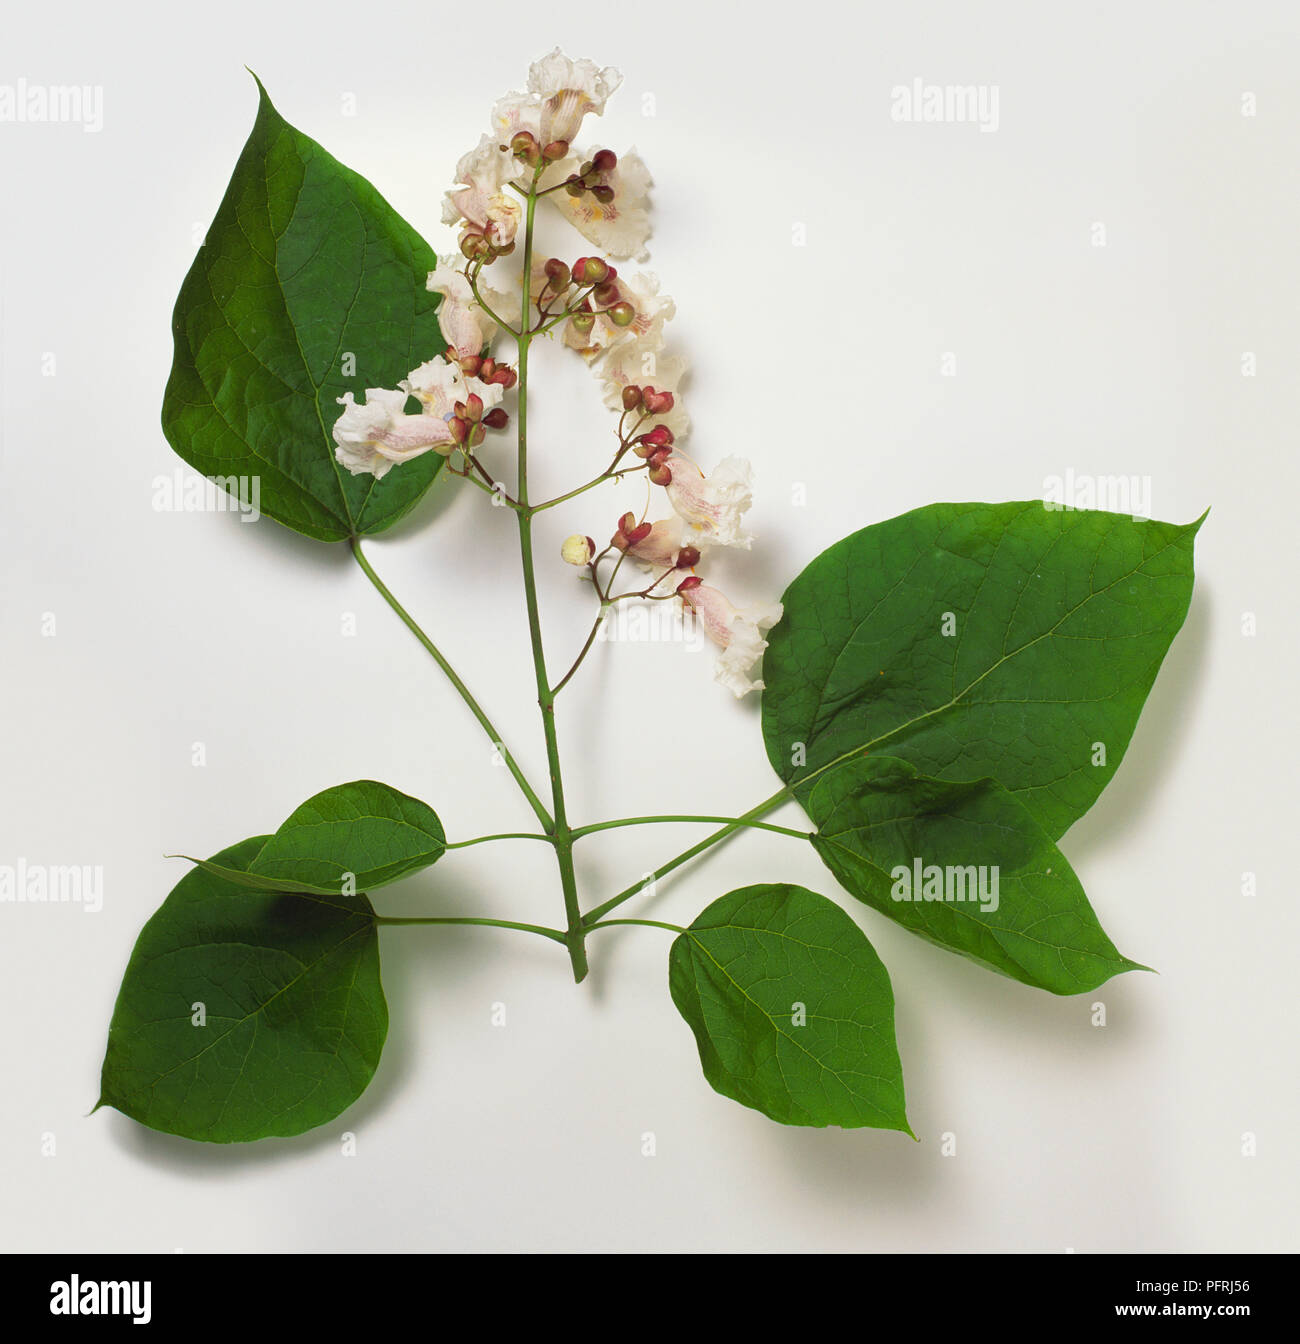 Catalpa bignonioides (Indian bean tree), stem with leaves and flowers Stock Photo